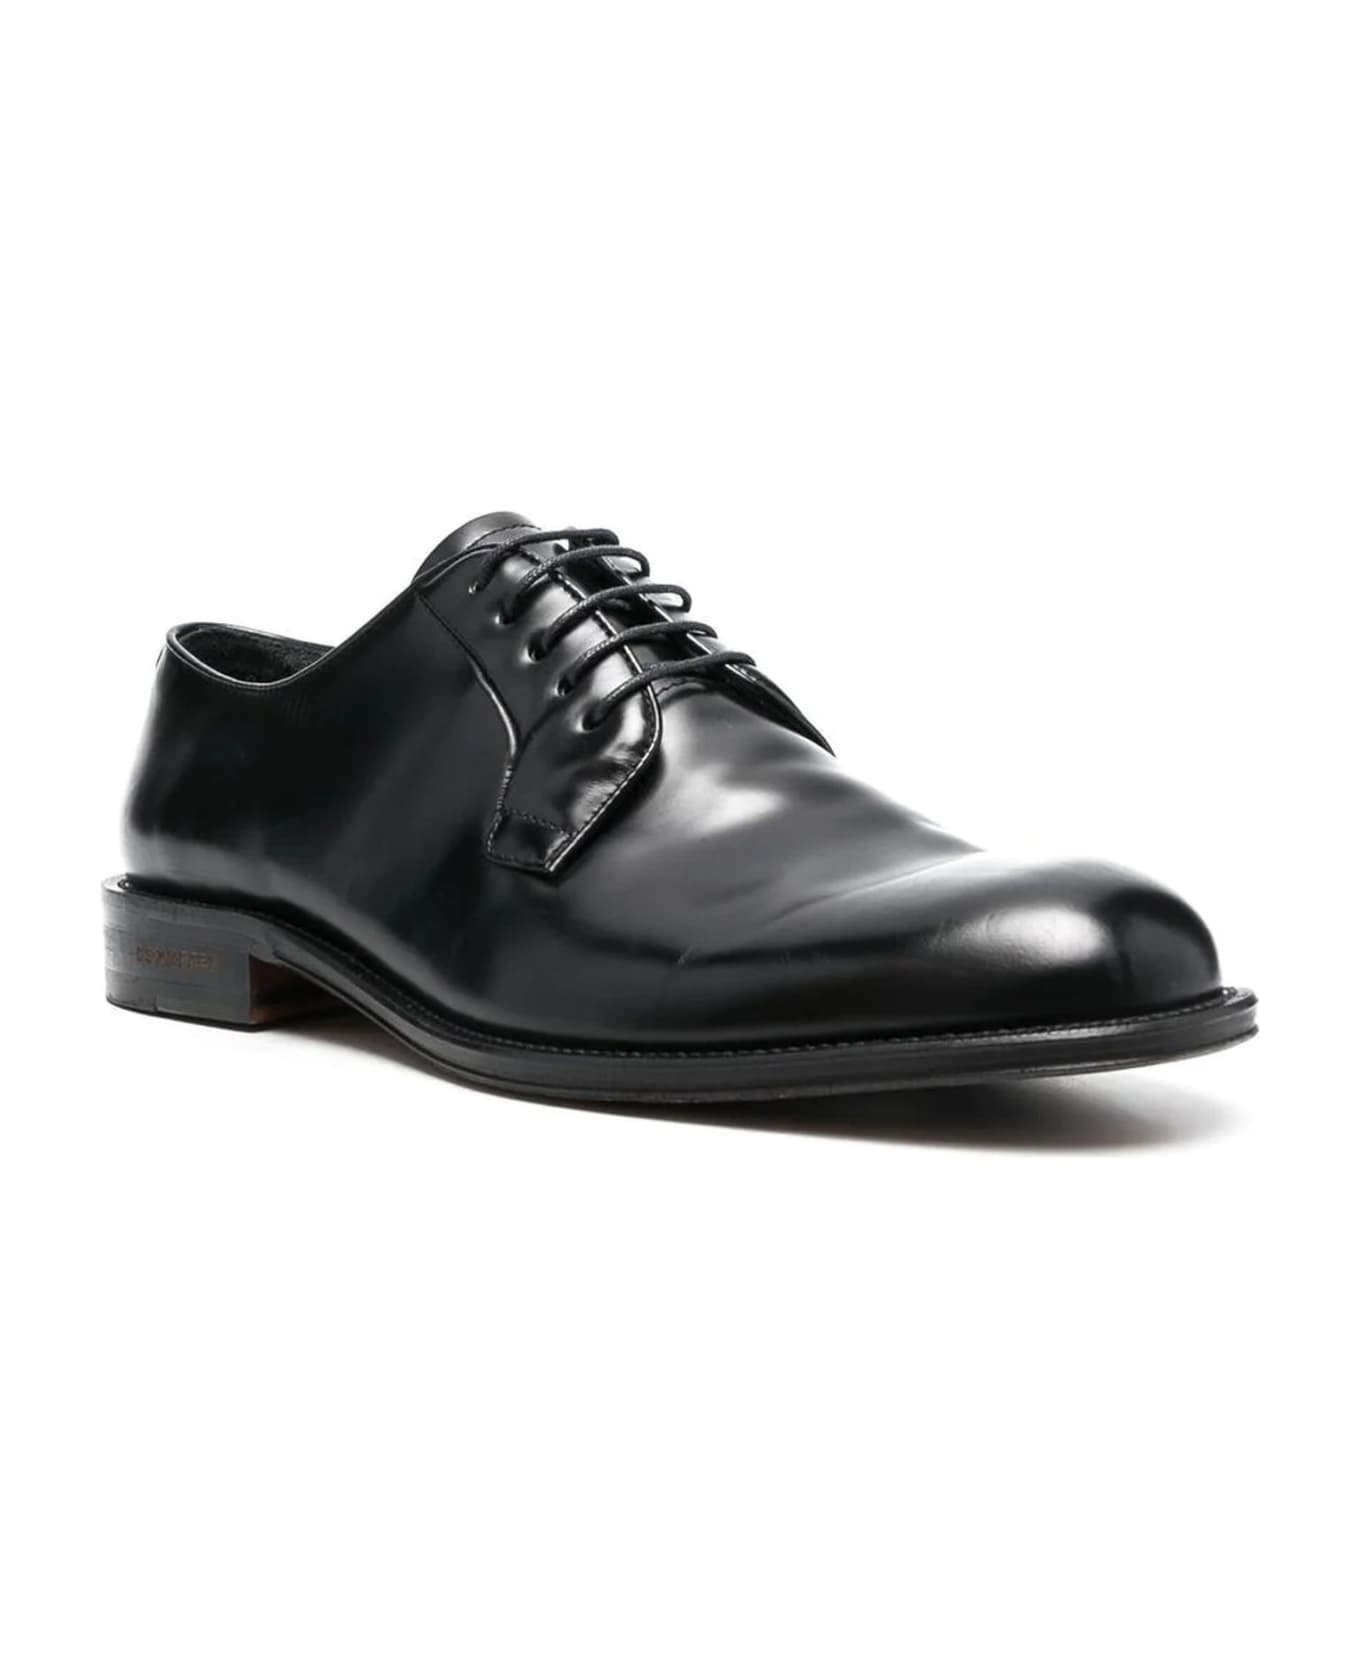 Dsquared2 Black Calf Leather Lace-up Shoes - Nero